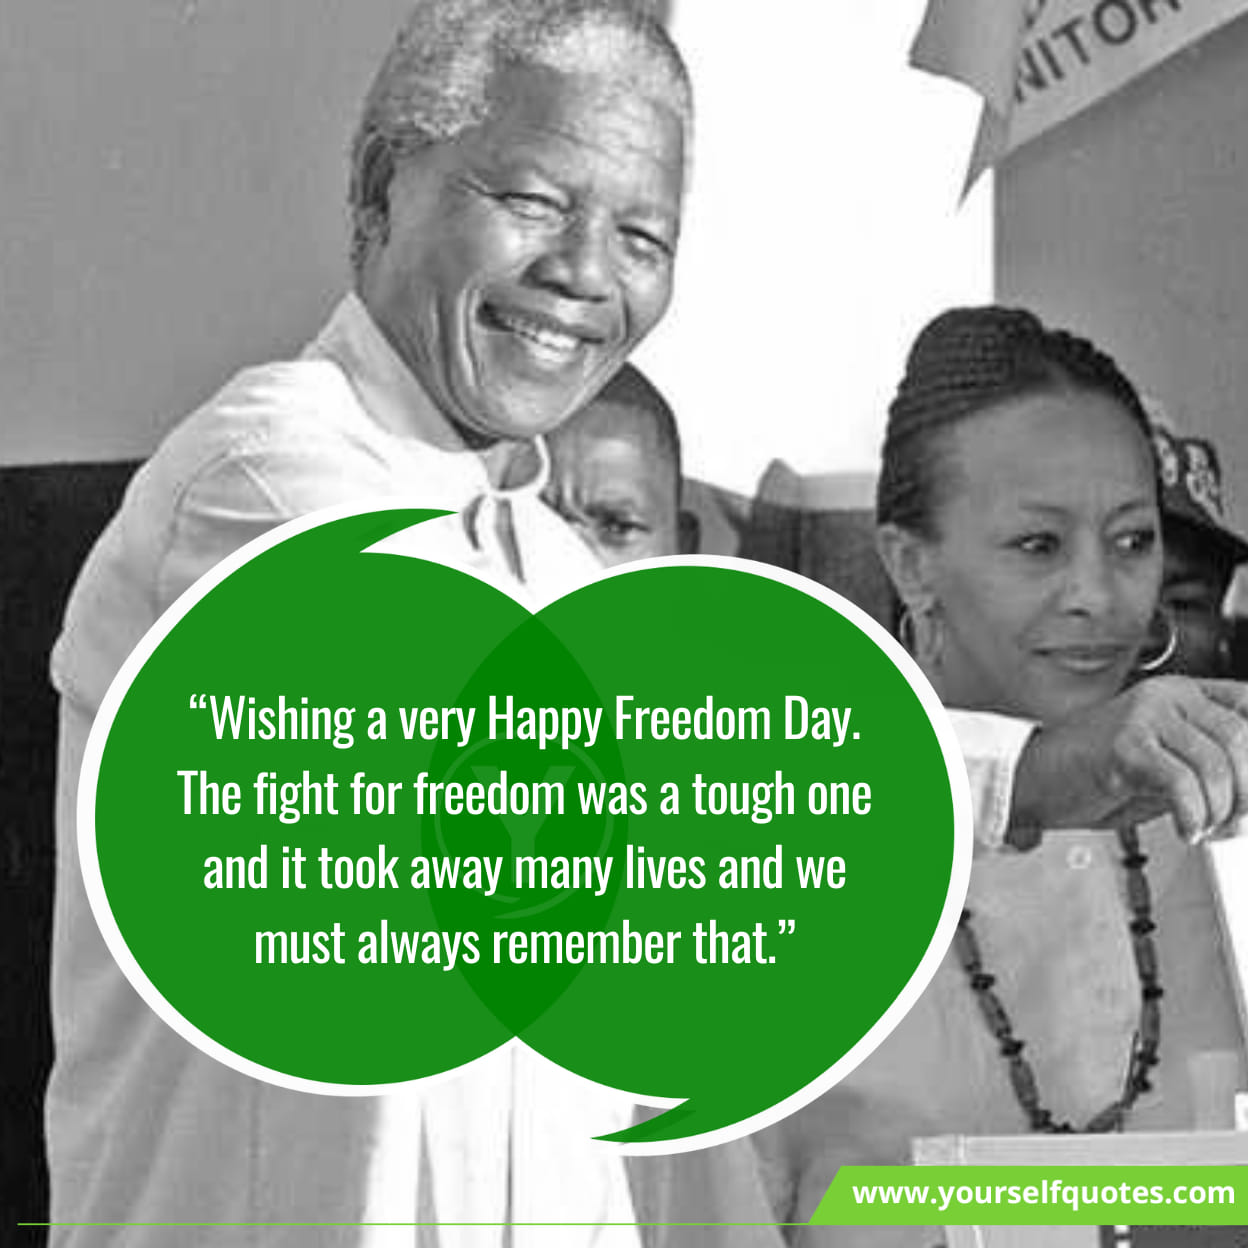 Inspiring Messages On Happy Freedom Day Wishes